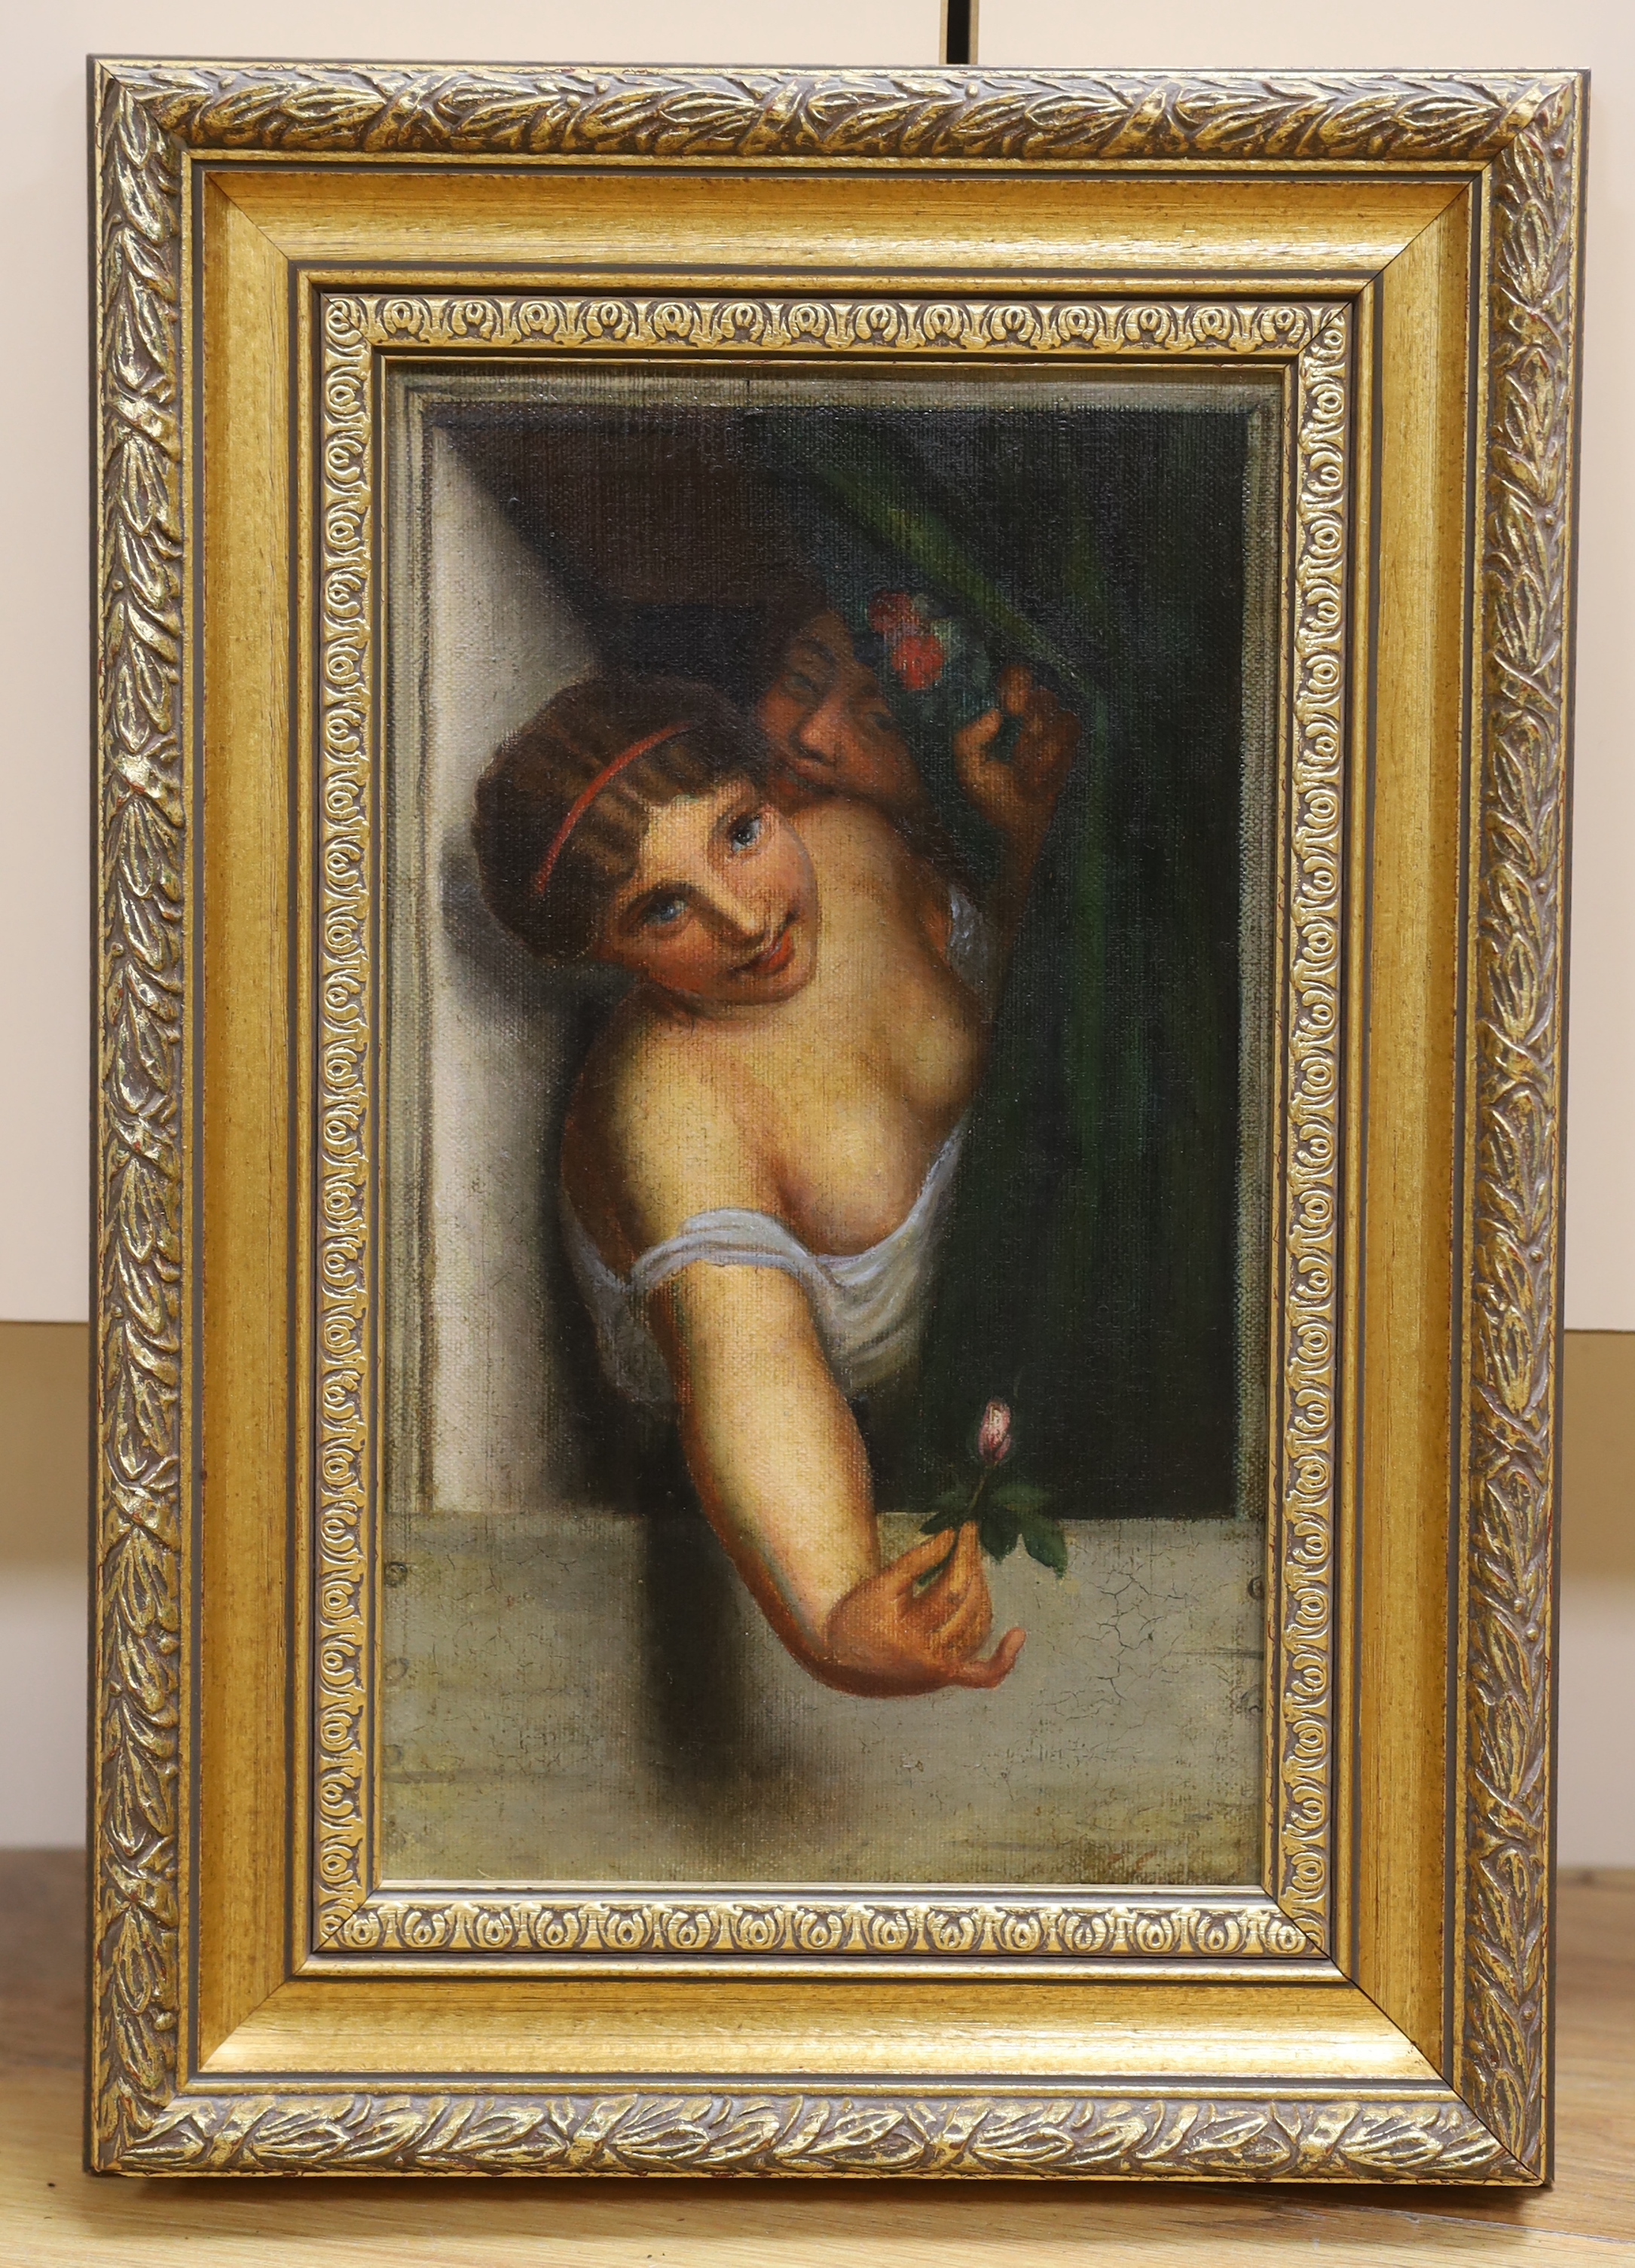 19th century Italian School, oil on canvas, Two figures at a window, one holding a rose bud, unsigned, 27cm x 16cm